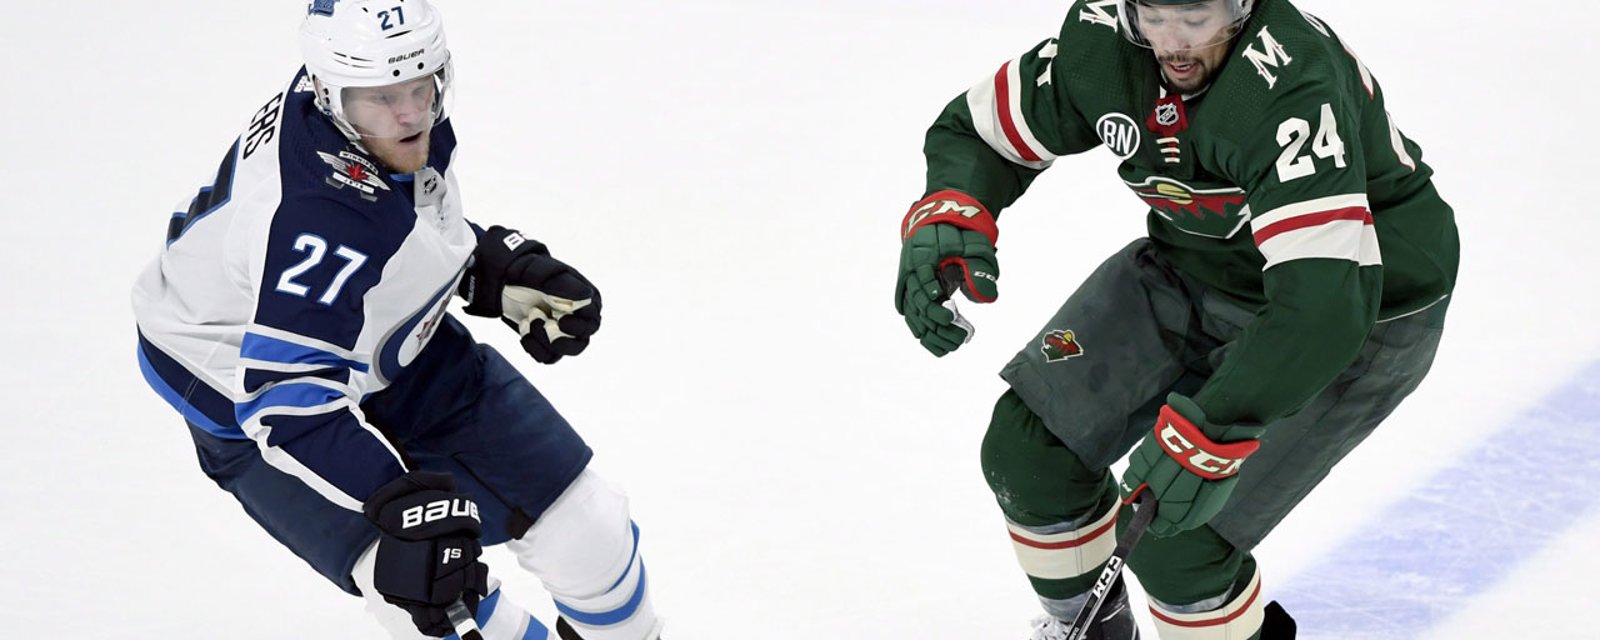 Rumour: Trade brewing between Wild and Jets with Dumba in the mix? 